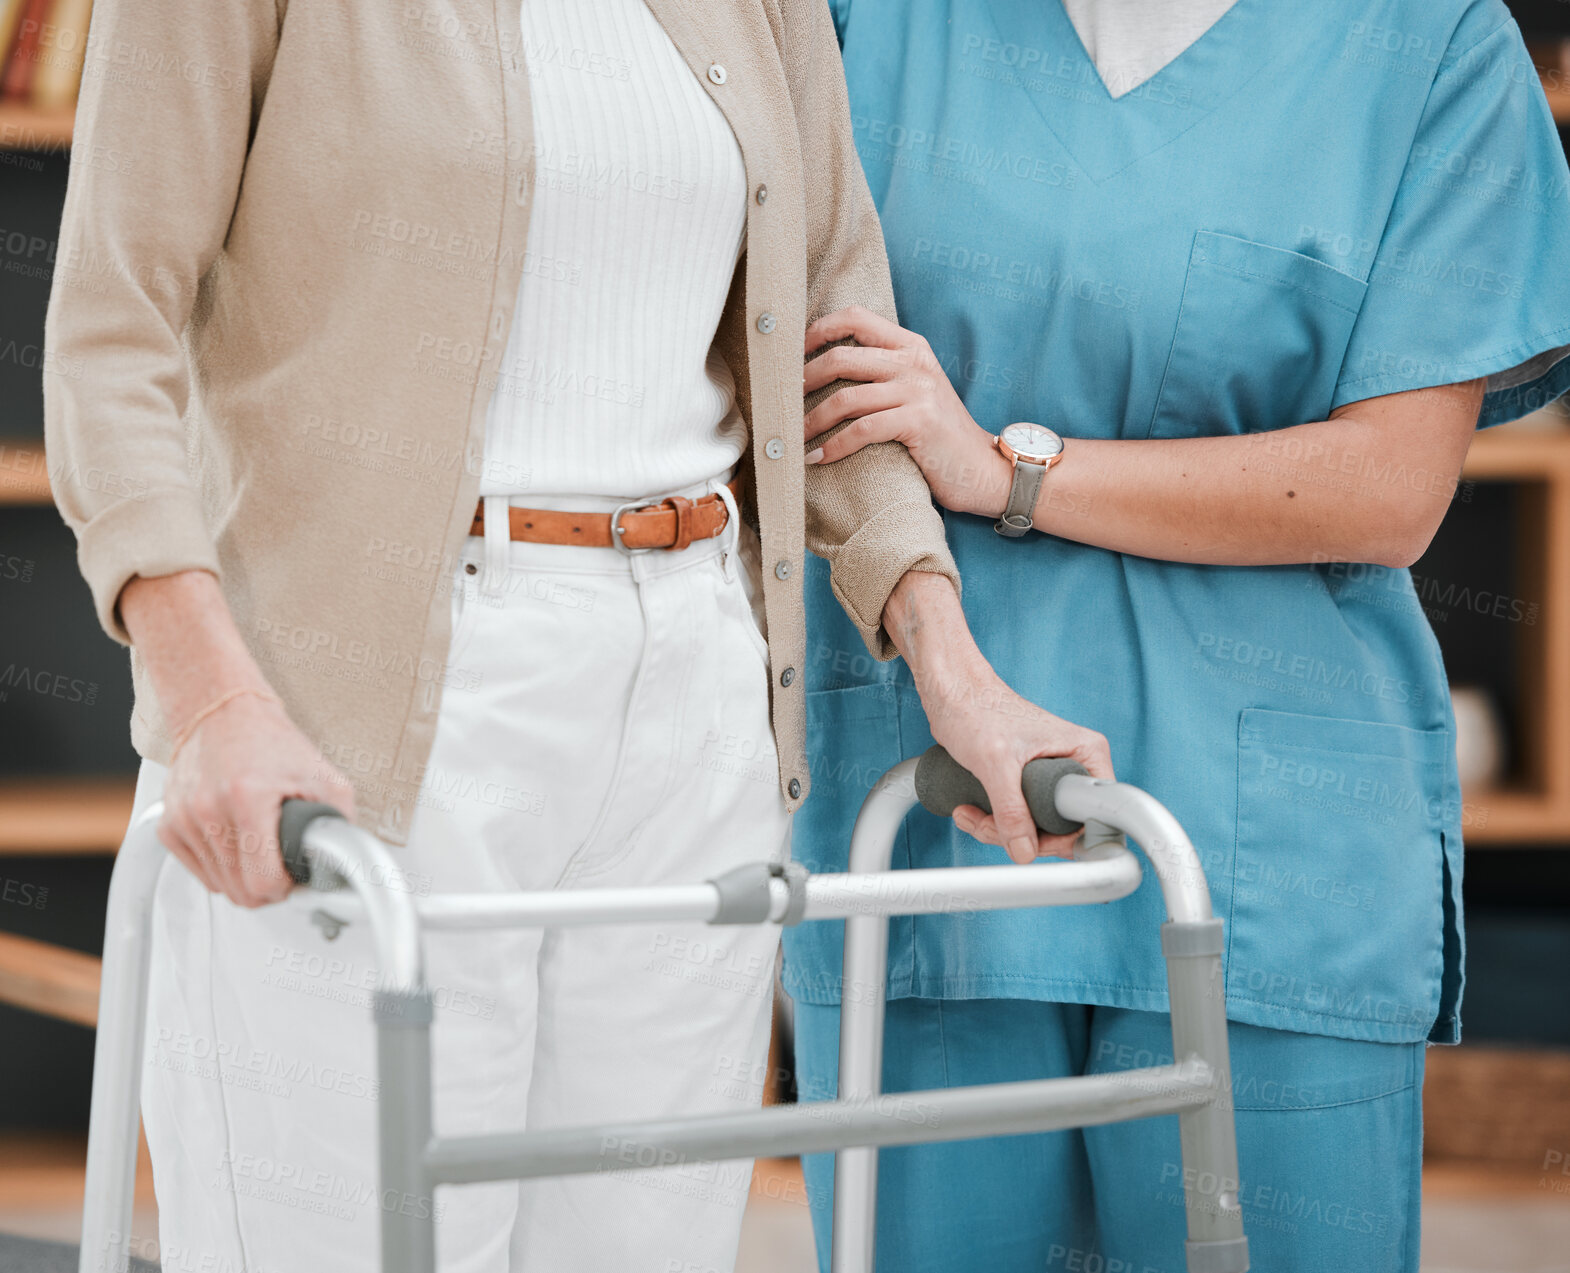 Buy stock photo Nurse or senior hands on walking frame for support, help or trust moving legs in rehabilitation. Physiotherapy healthcare, elderly nursing or medical caregiver consulting disabled patient